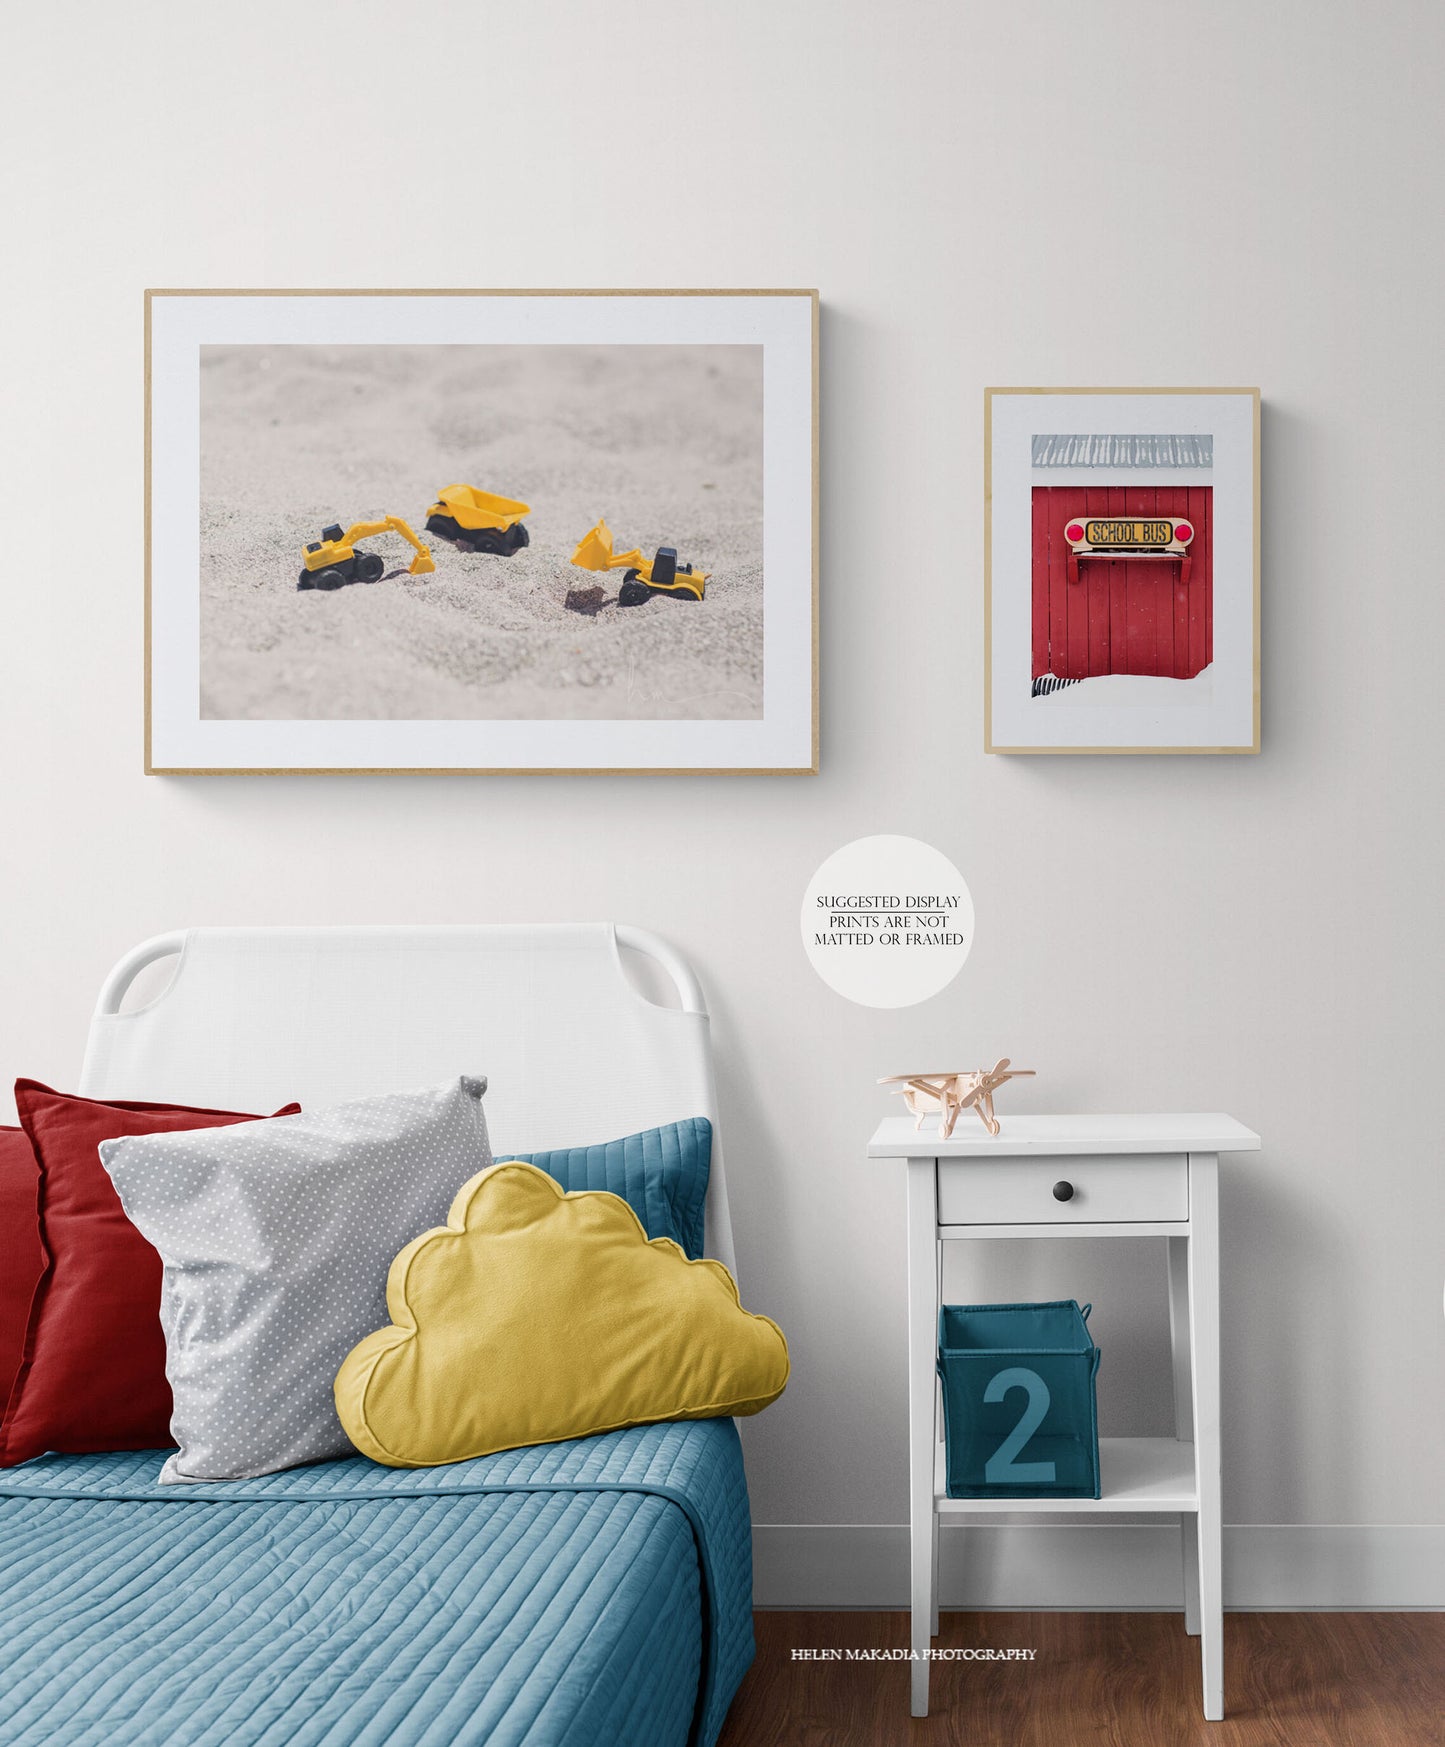 Construction site photograph print in a kids bedroom as wall art